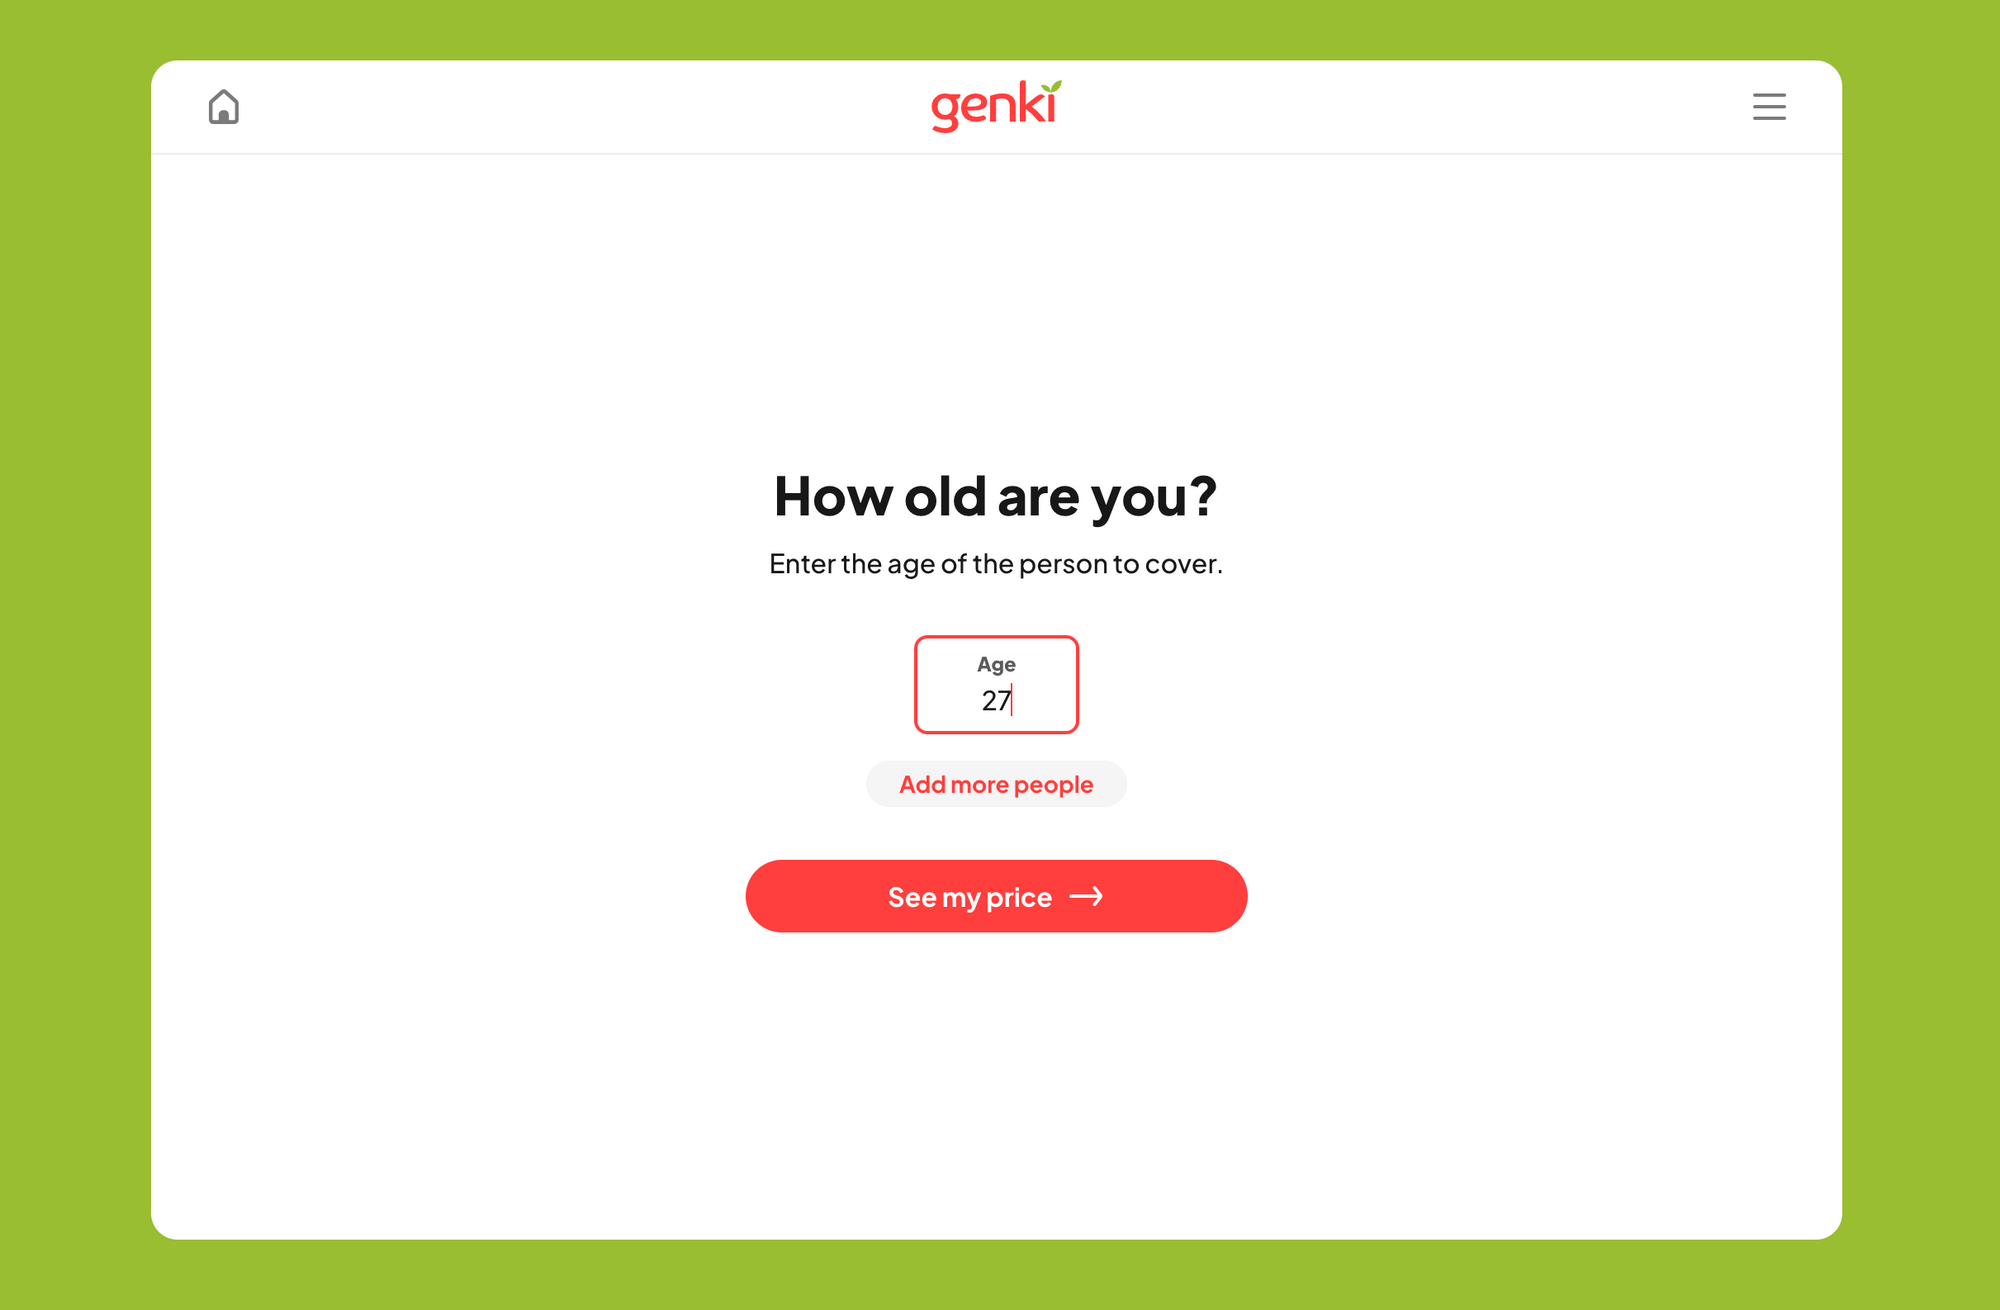 genki quote step 3: how old are you?